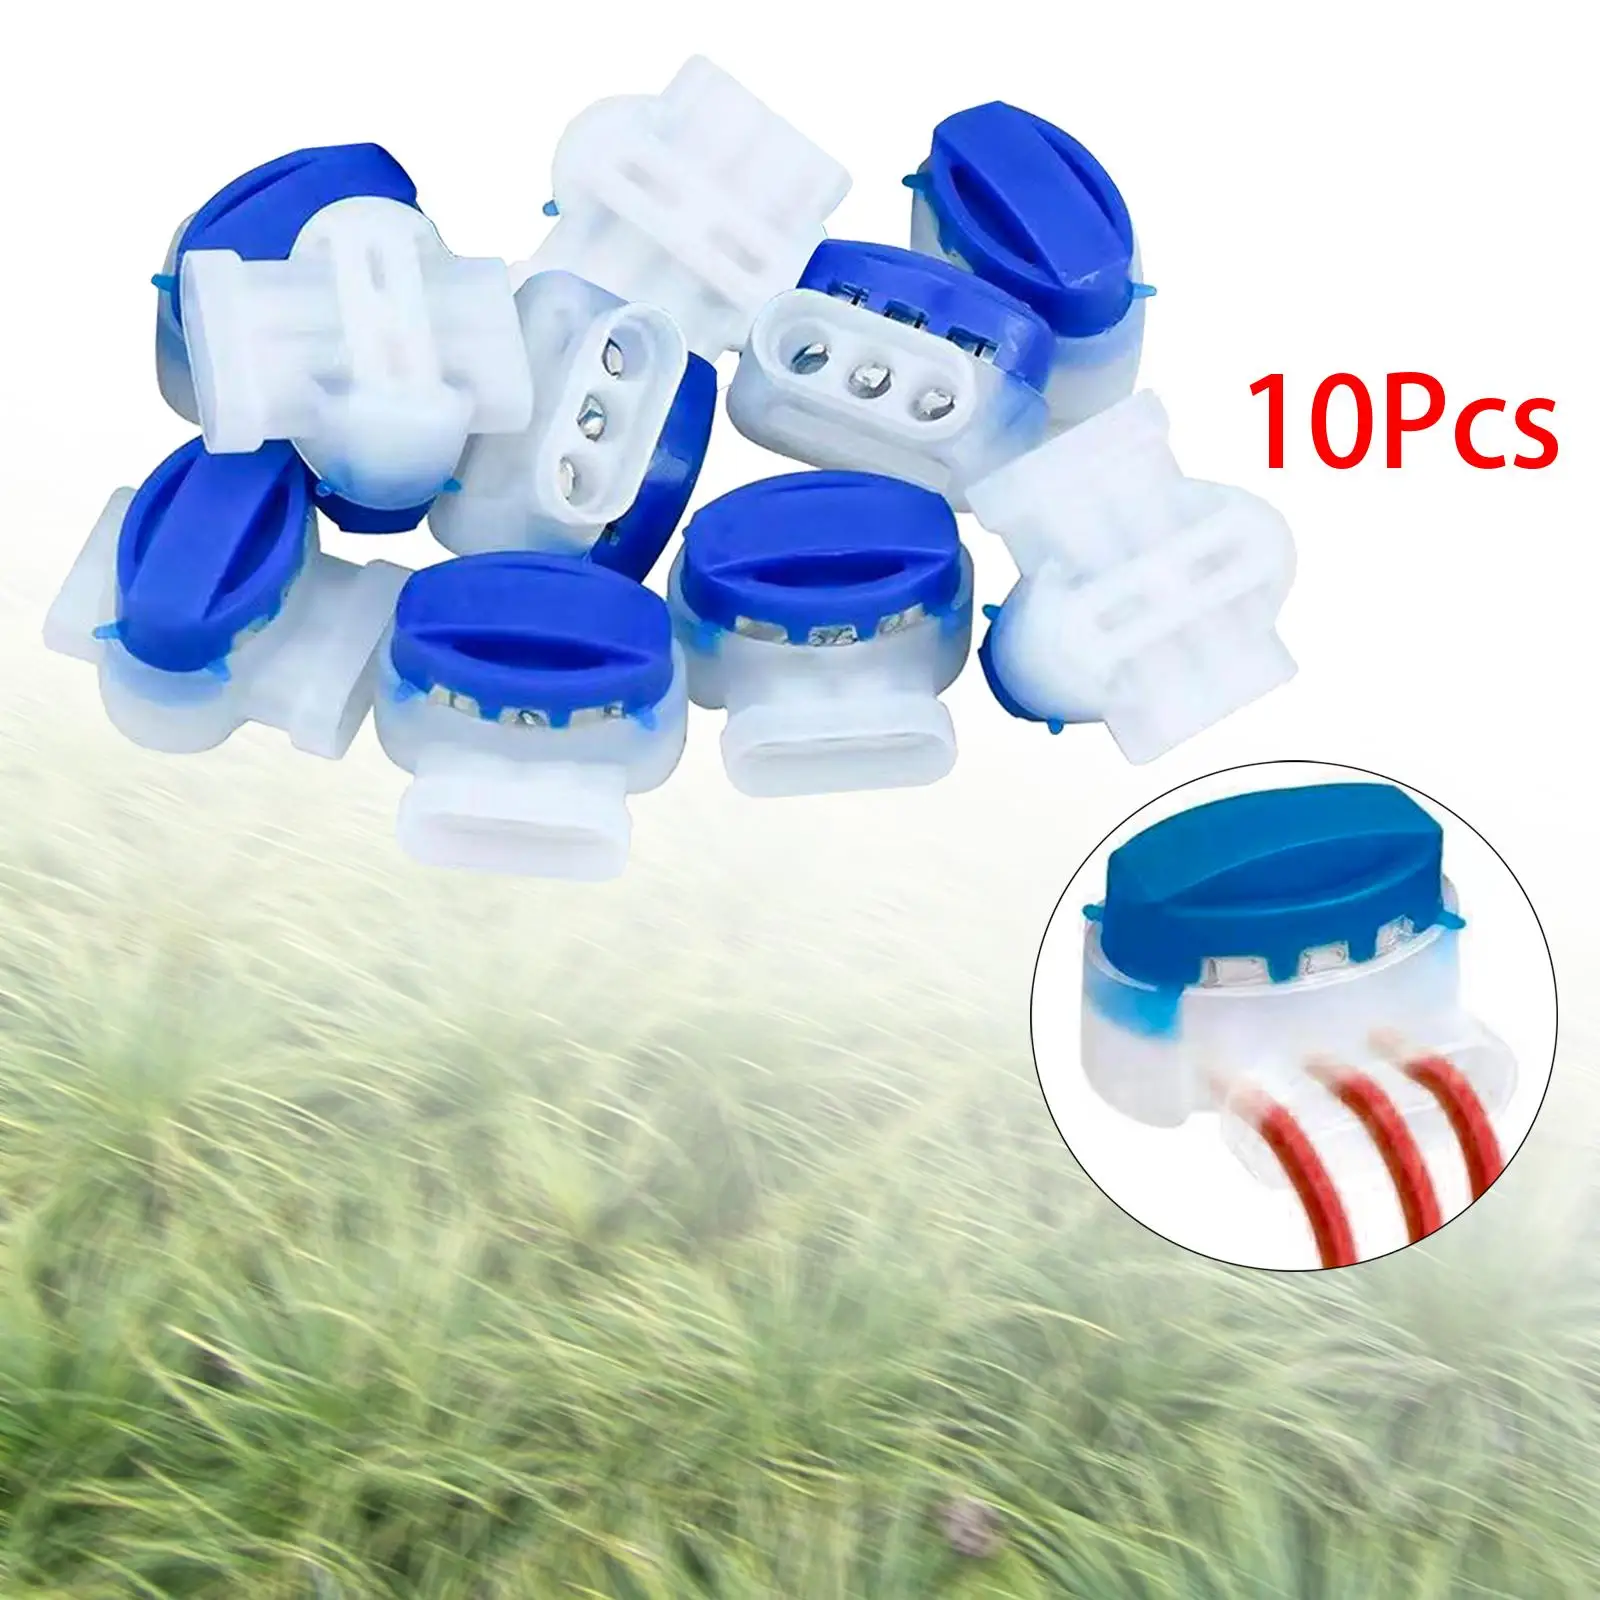 10x 3 Way Wire Connectors IDC 314-box Replacement Parts Waterproof for Robotic Lawn Mowers Irrigation System 22-14 AWG Cables